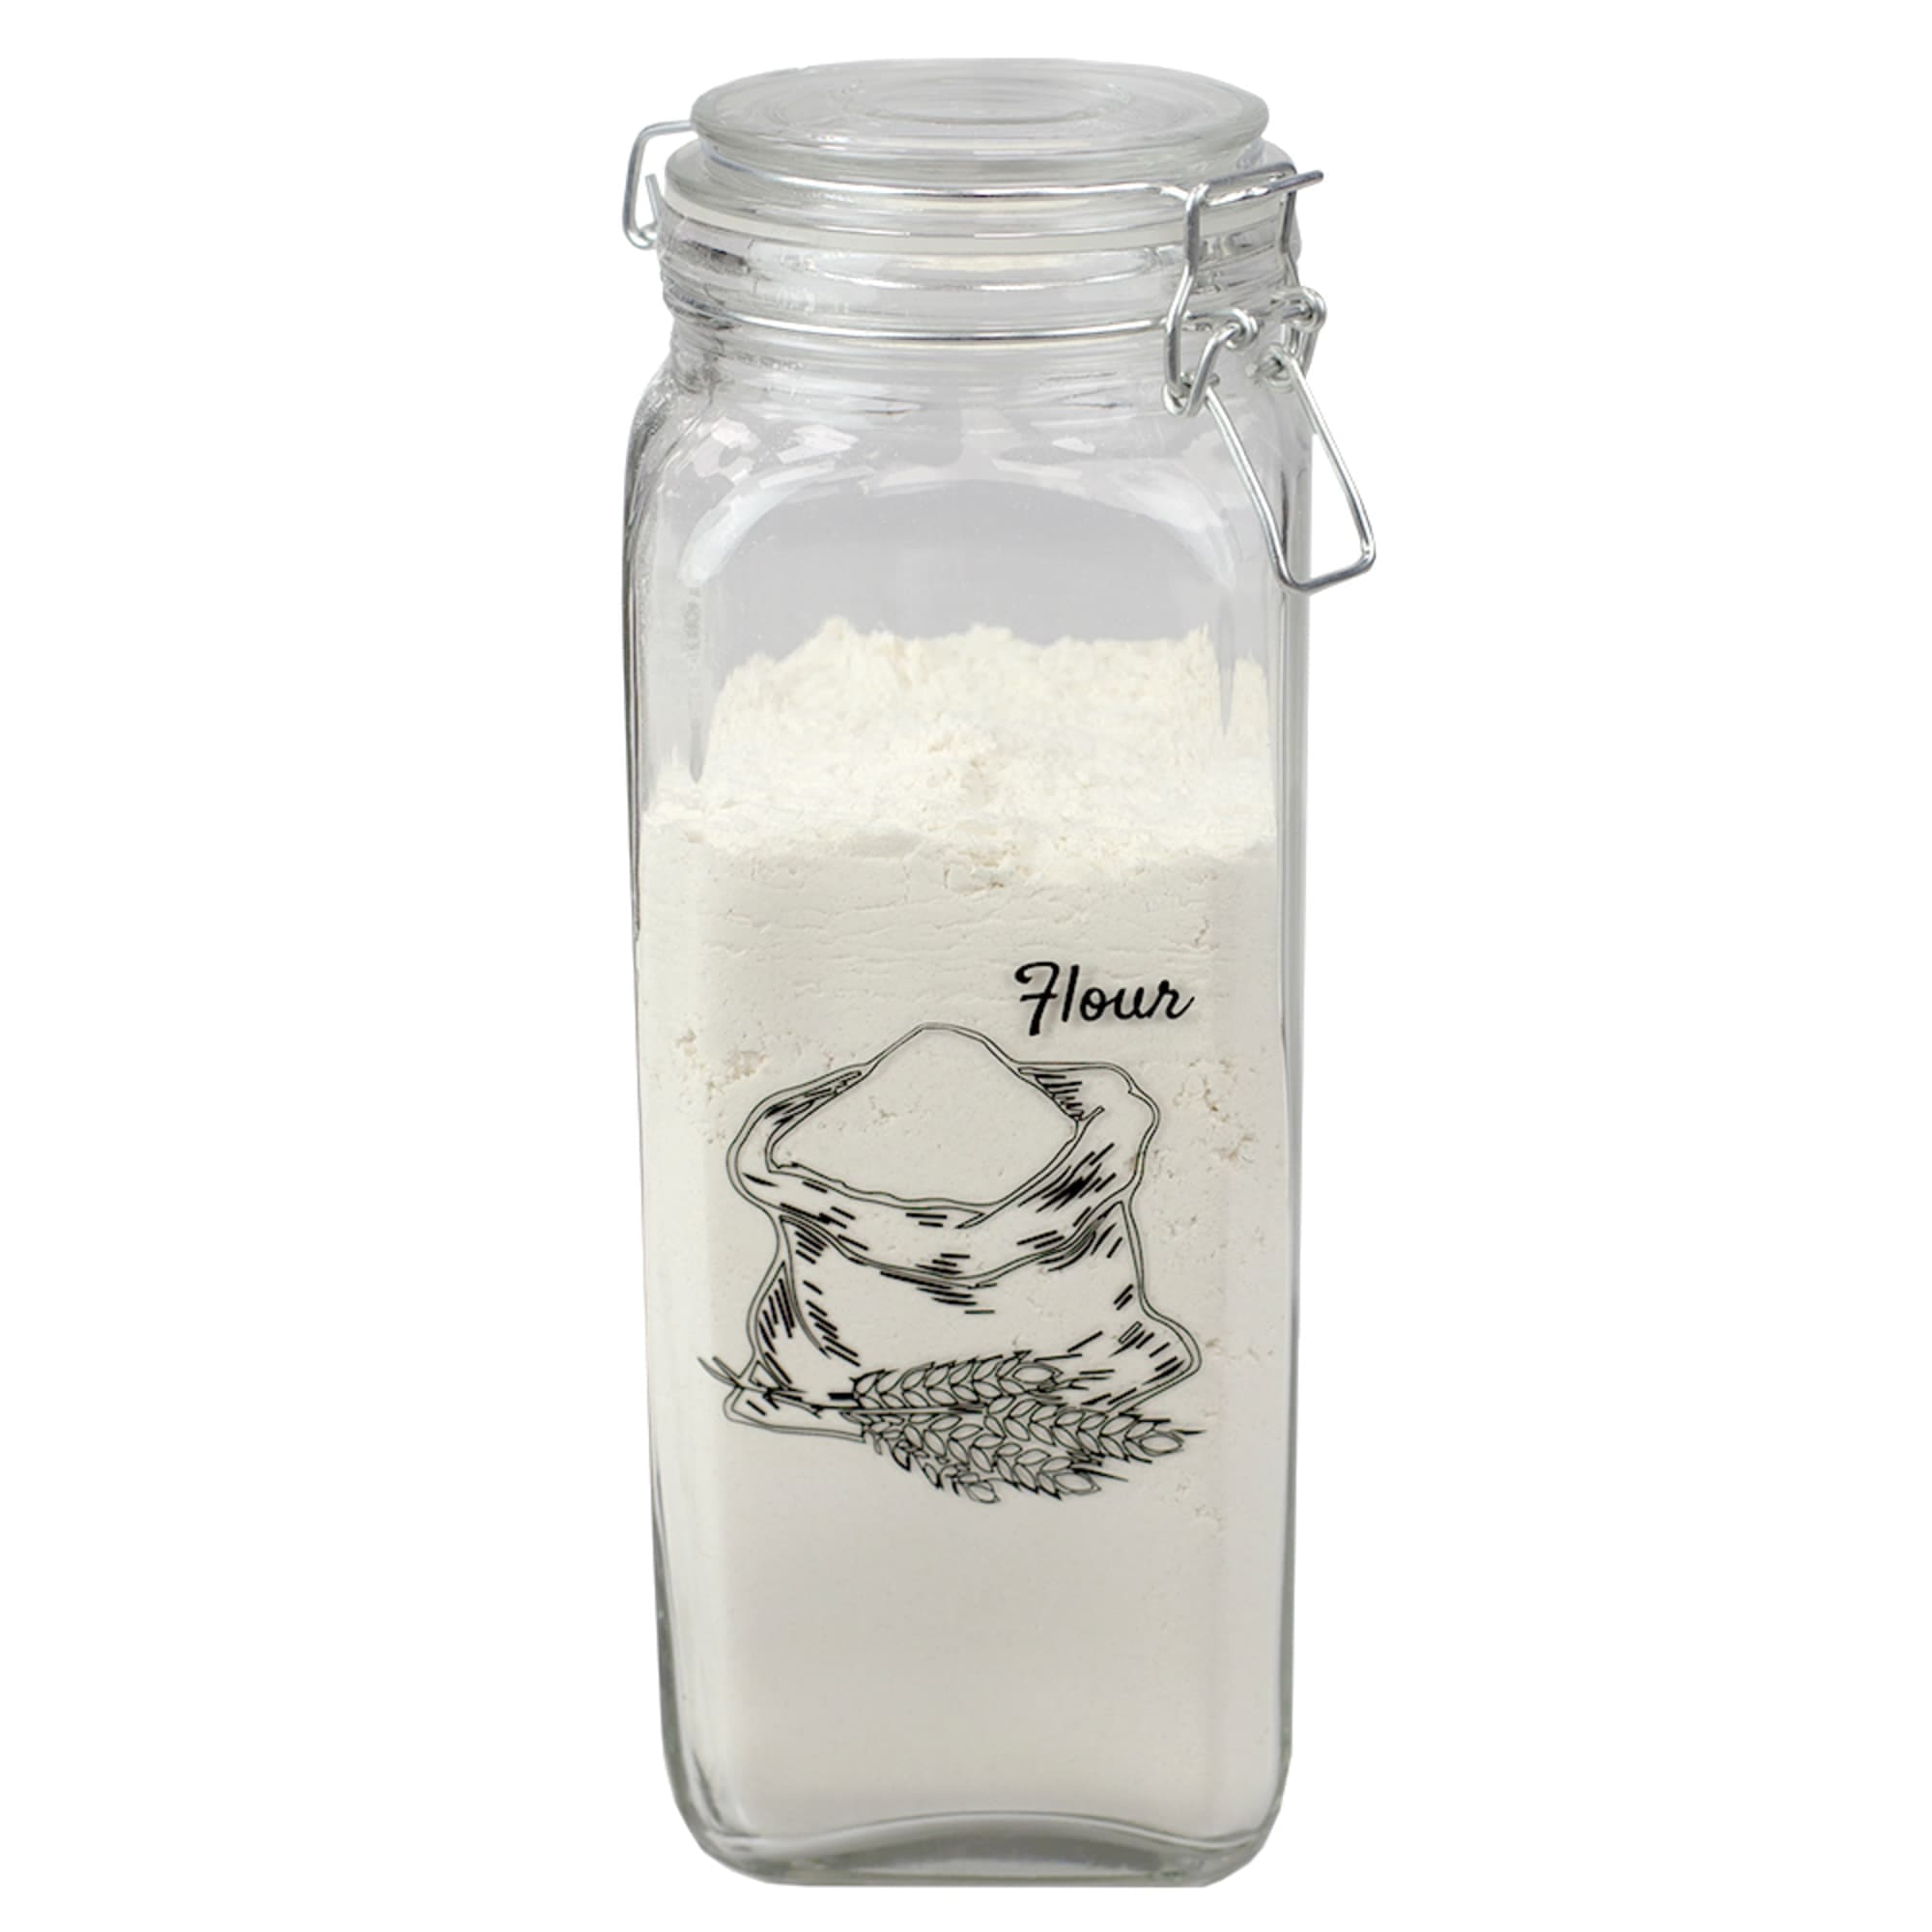 Home Basics Ludlow 67 oz. Glass Canister with Metal Clasp, Clear $7.00 EACH, CASE PACK OF 12